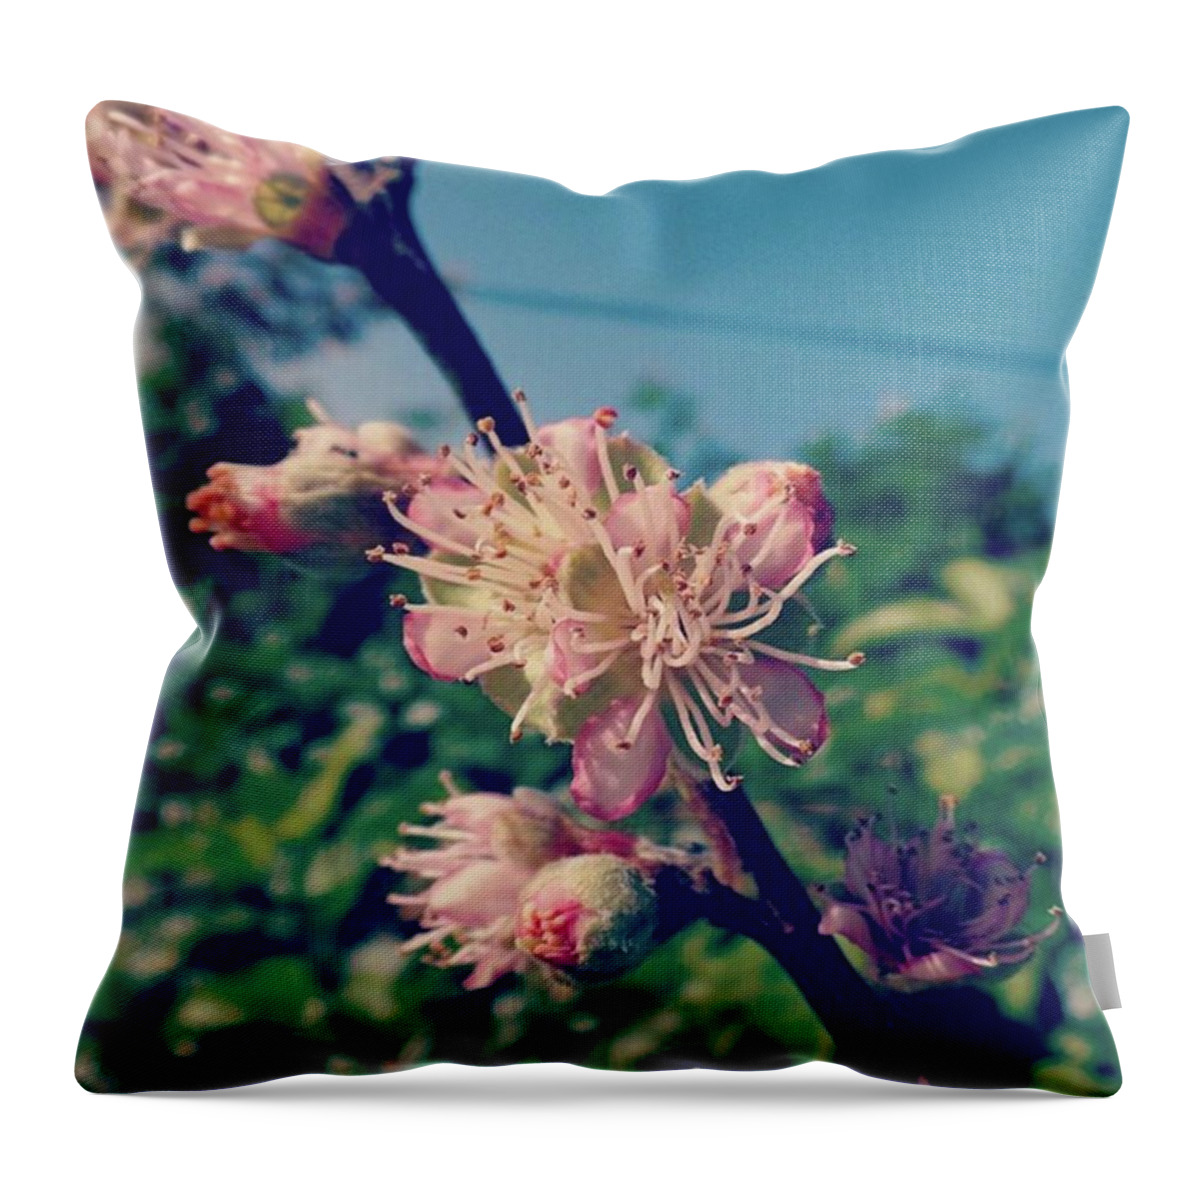 Peach Throw Pillow featuring the photograph Peach Blossoms by Jacci Freimond Rudling